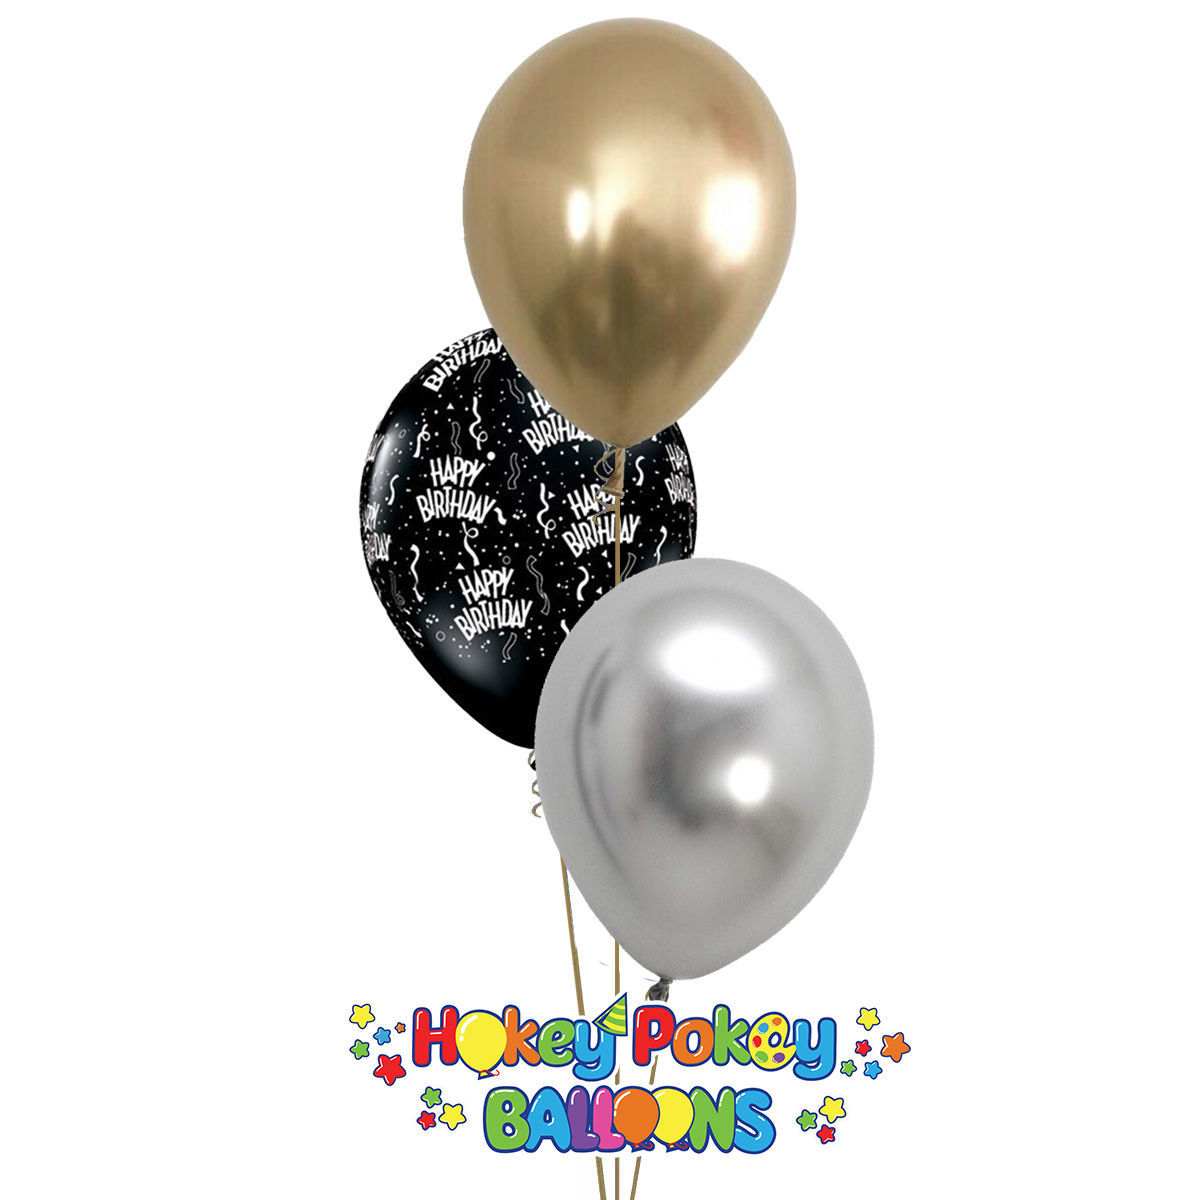 Picture of 11'' Birthday  Around  with Chrome Balloon Bouquet (up to 13 balloons)